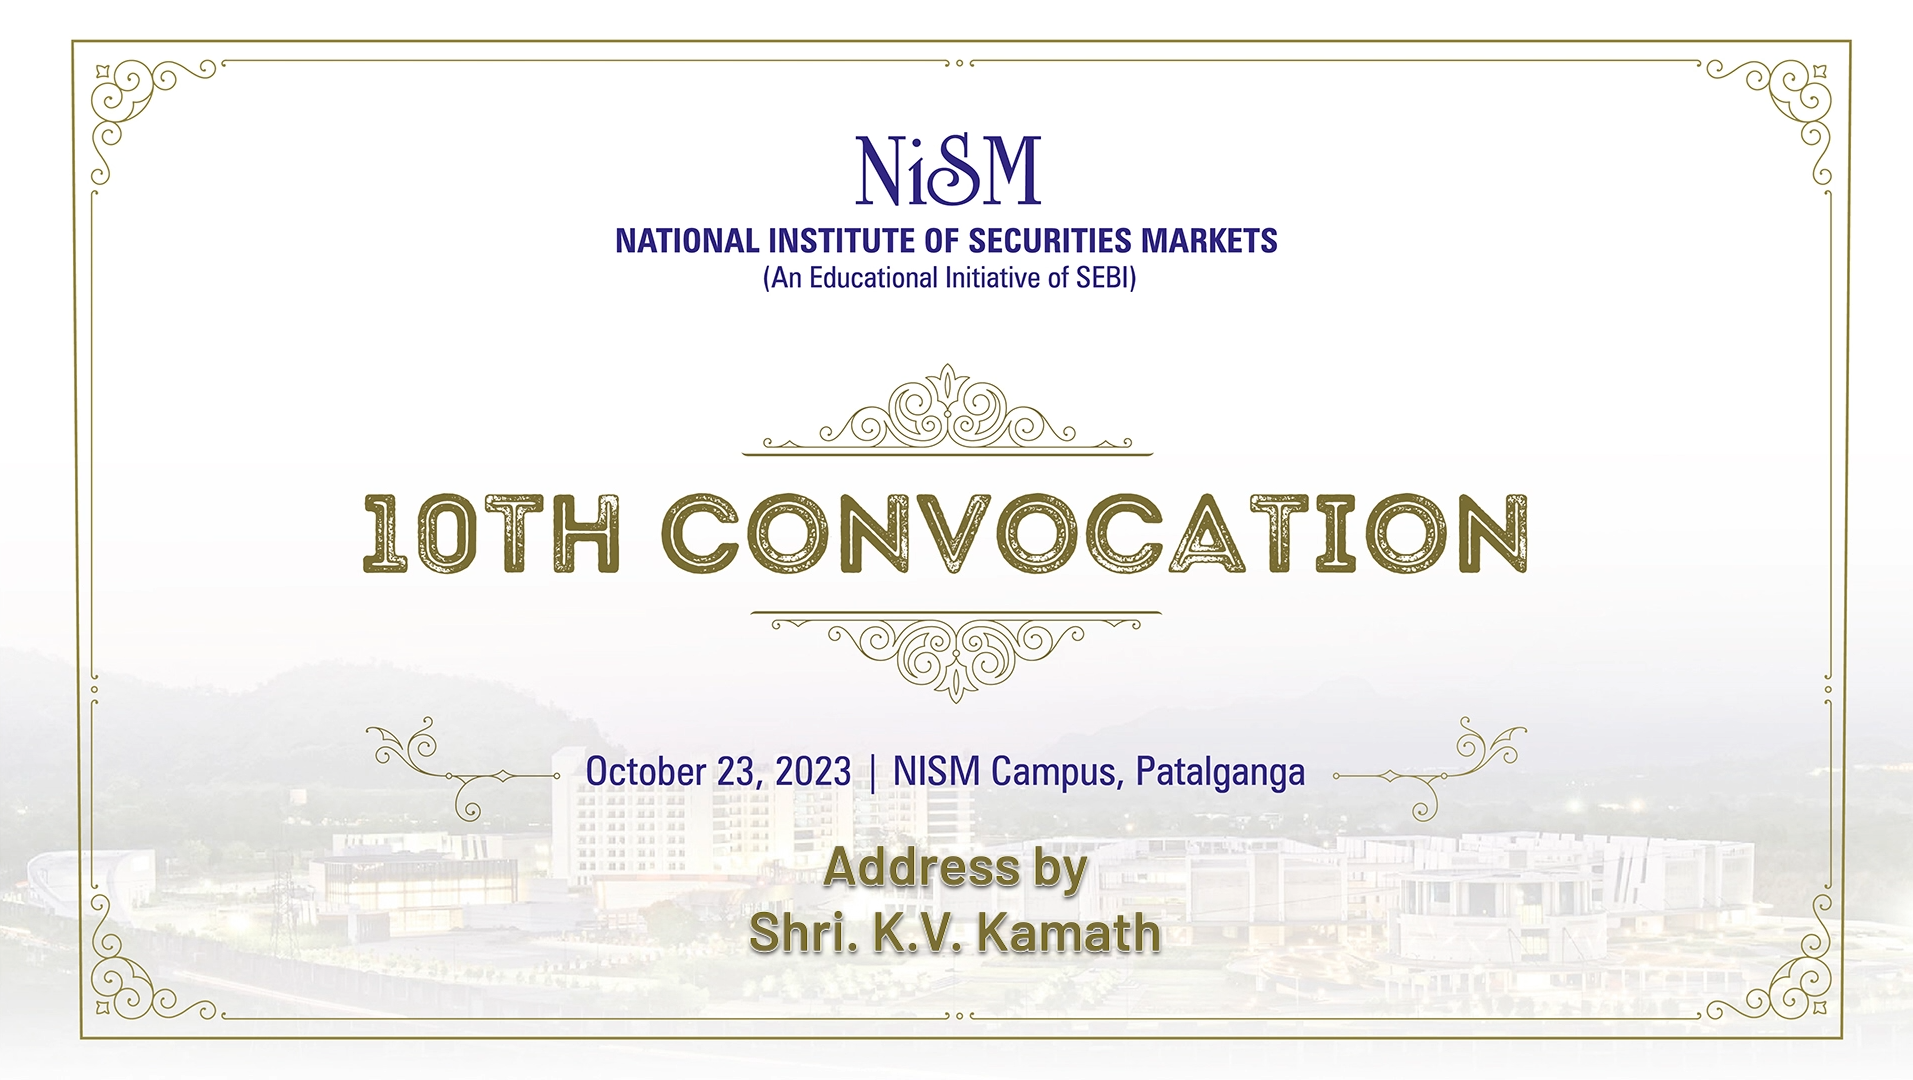 Address by Chief Guest Shri K V Kamath during the 10th Convocation Ceremony at the NISM Campus